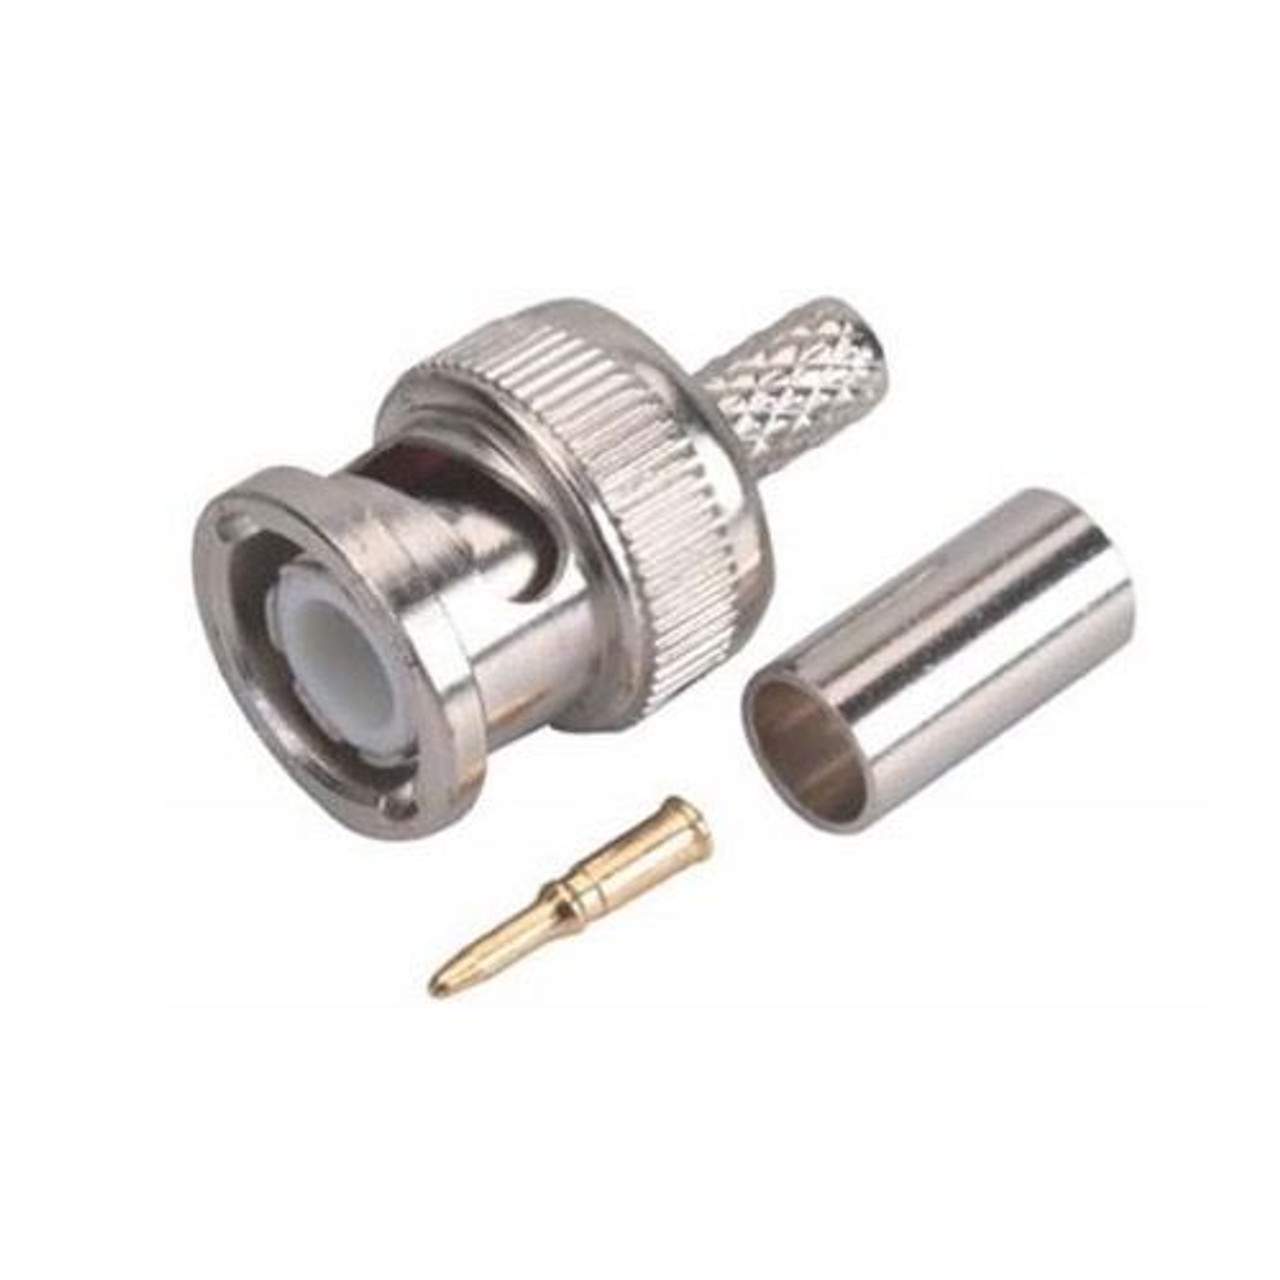 Steren 200-145 RG58 BNC Coaxial Connector 3 Piece Crimp on Commercial Grade Nickel Plate Male, Part # 200145